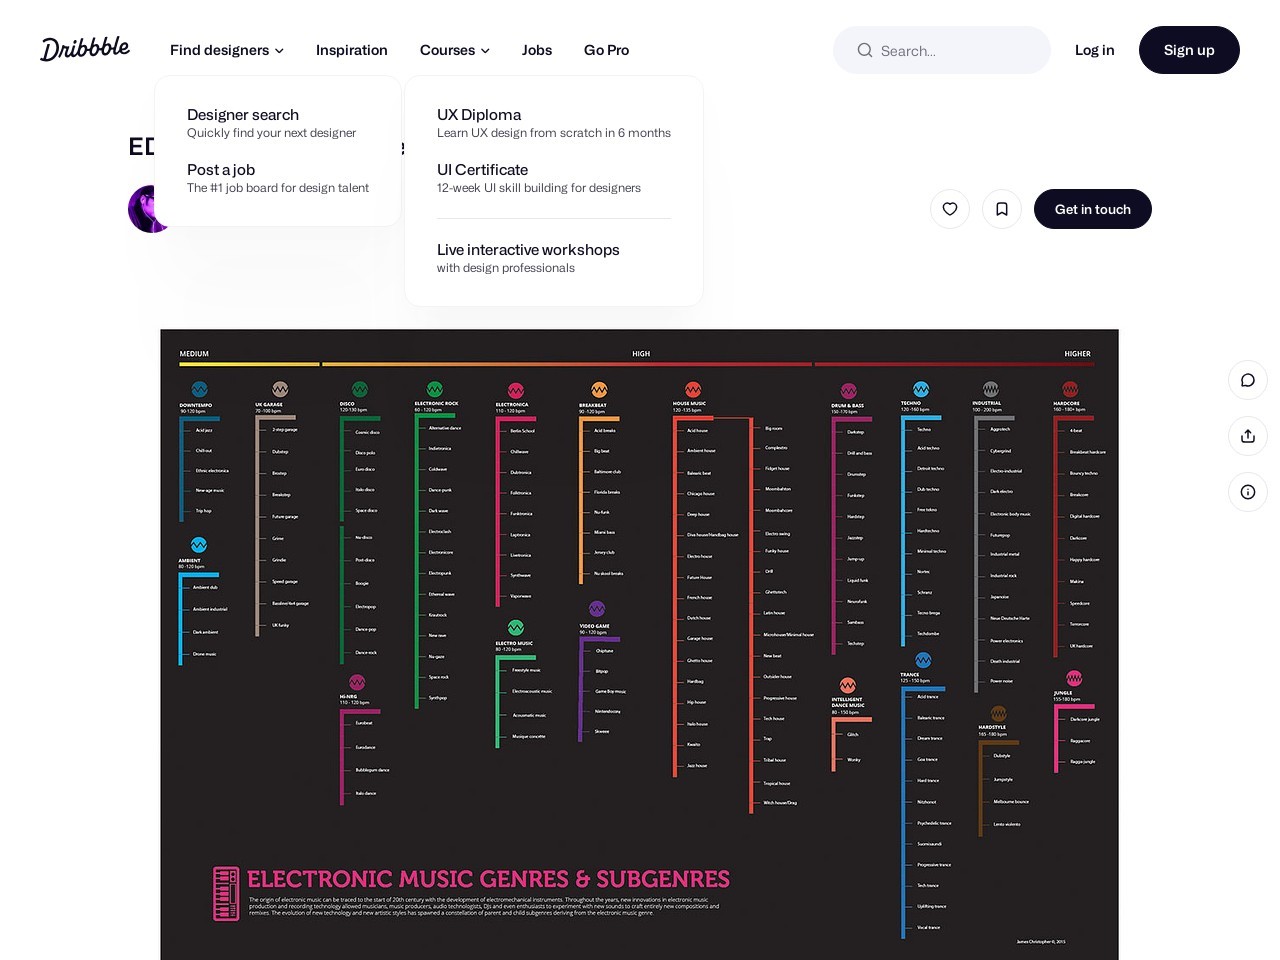 EDM Genres and Sub-genres Infographic by James Christopher on Dribbble